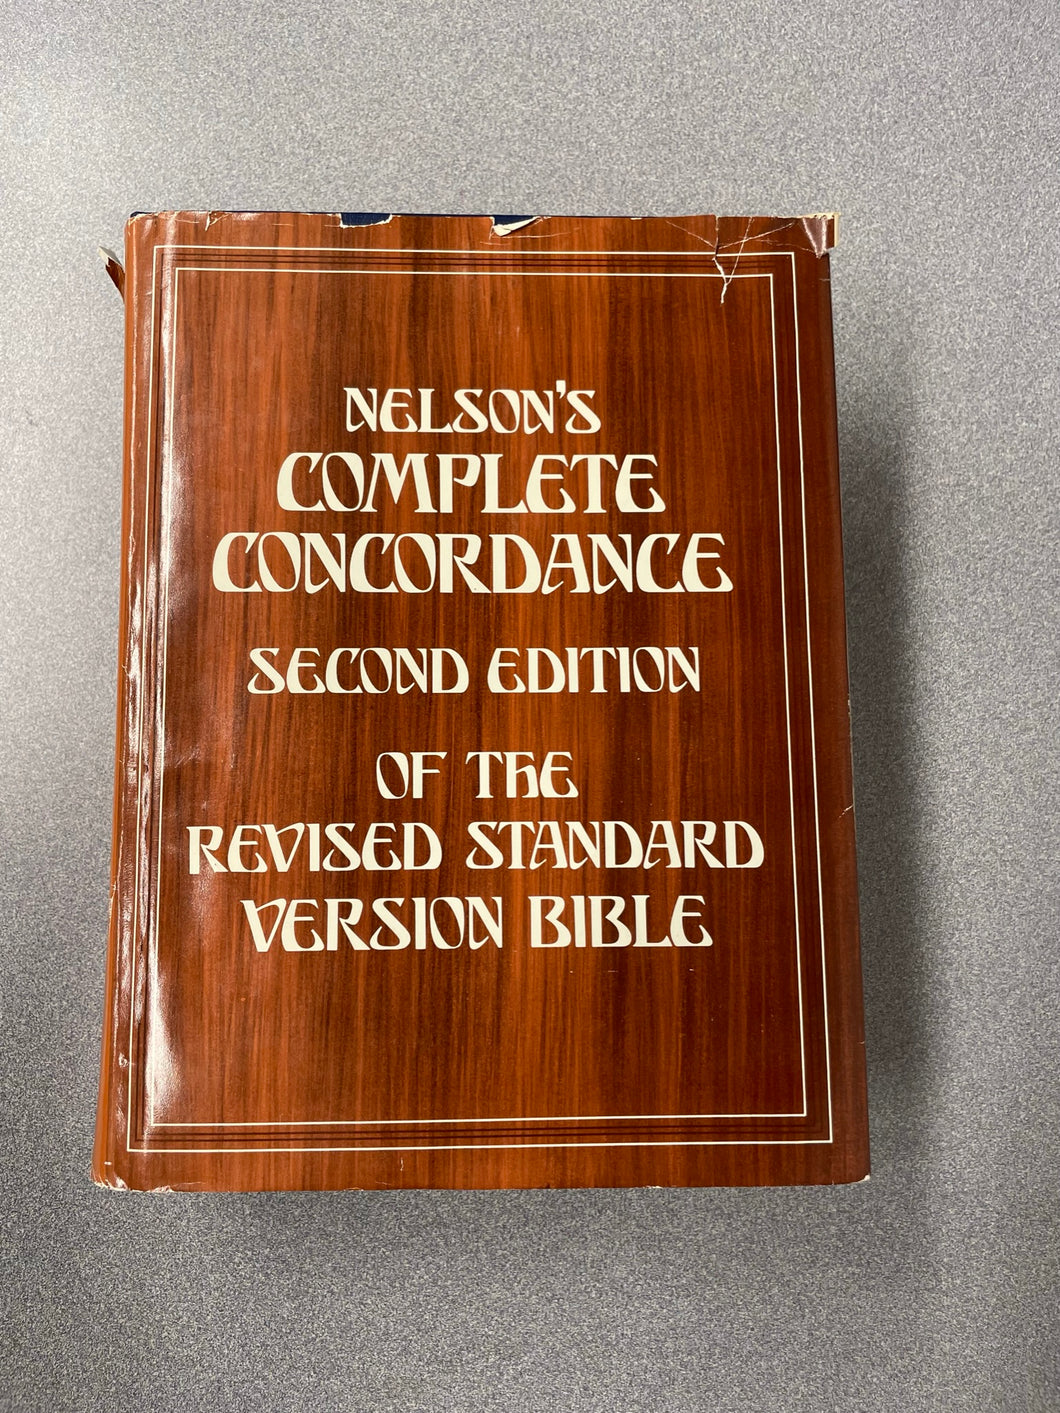 Nelson's Complete Concordance, Secord Edition of the Revised Standard Version Bible [1972] RS 3/23